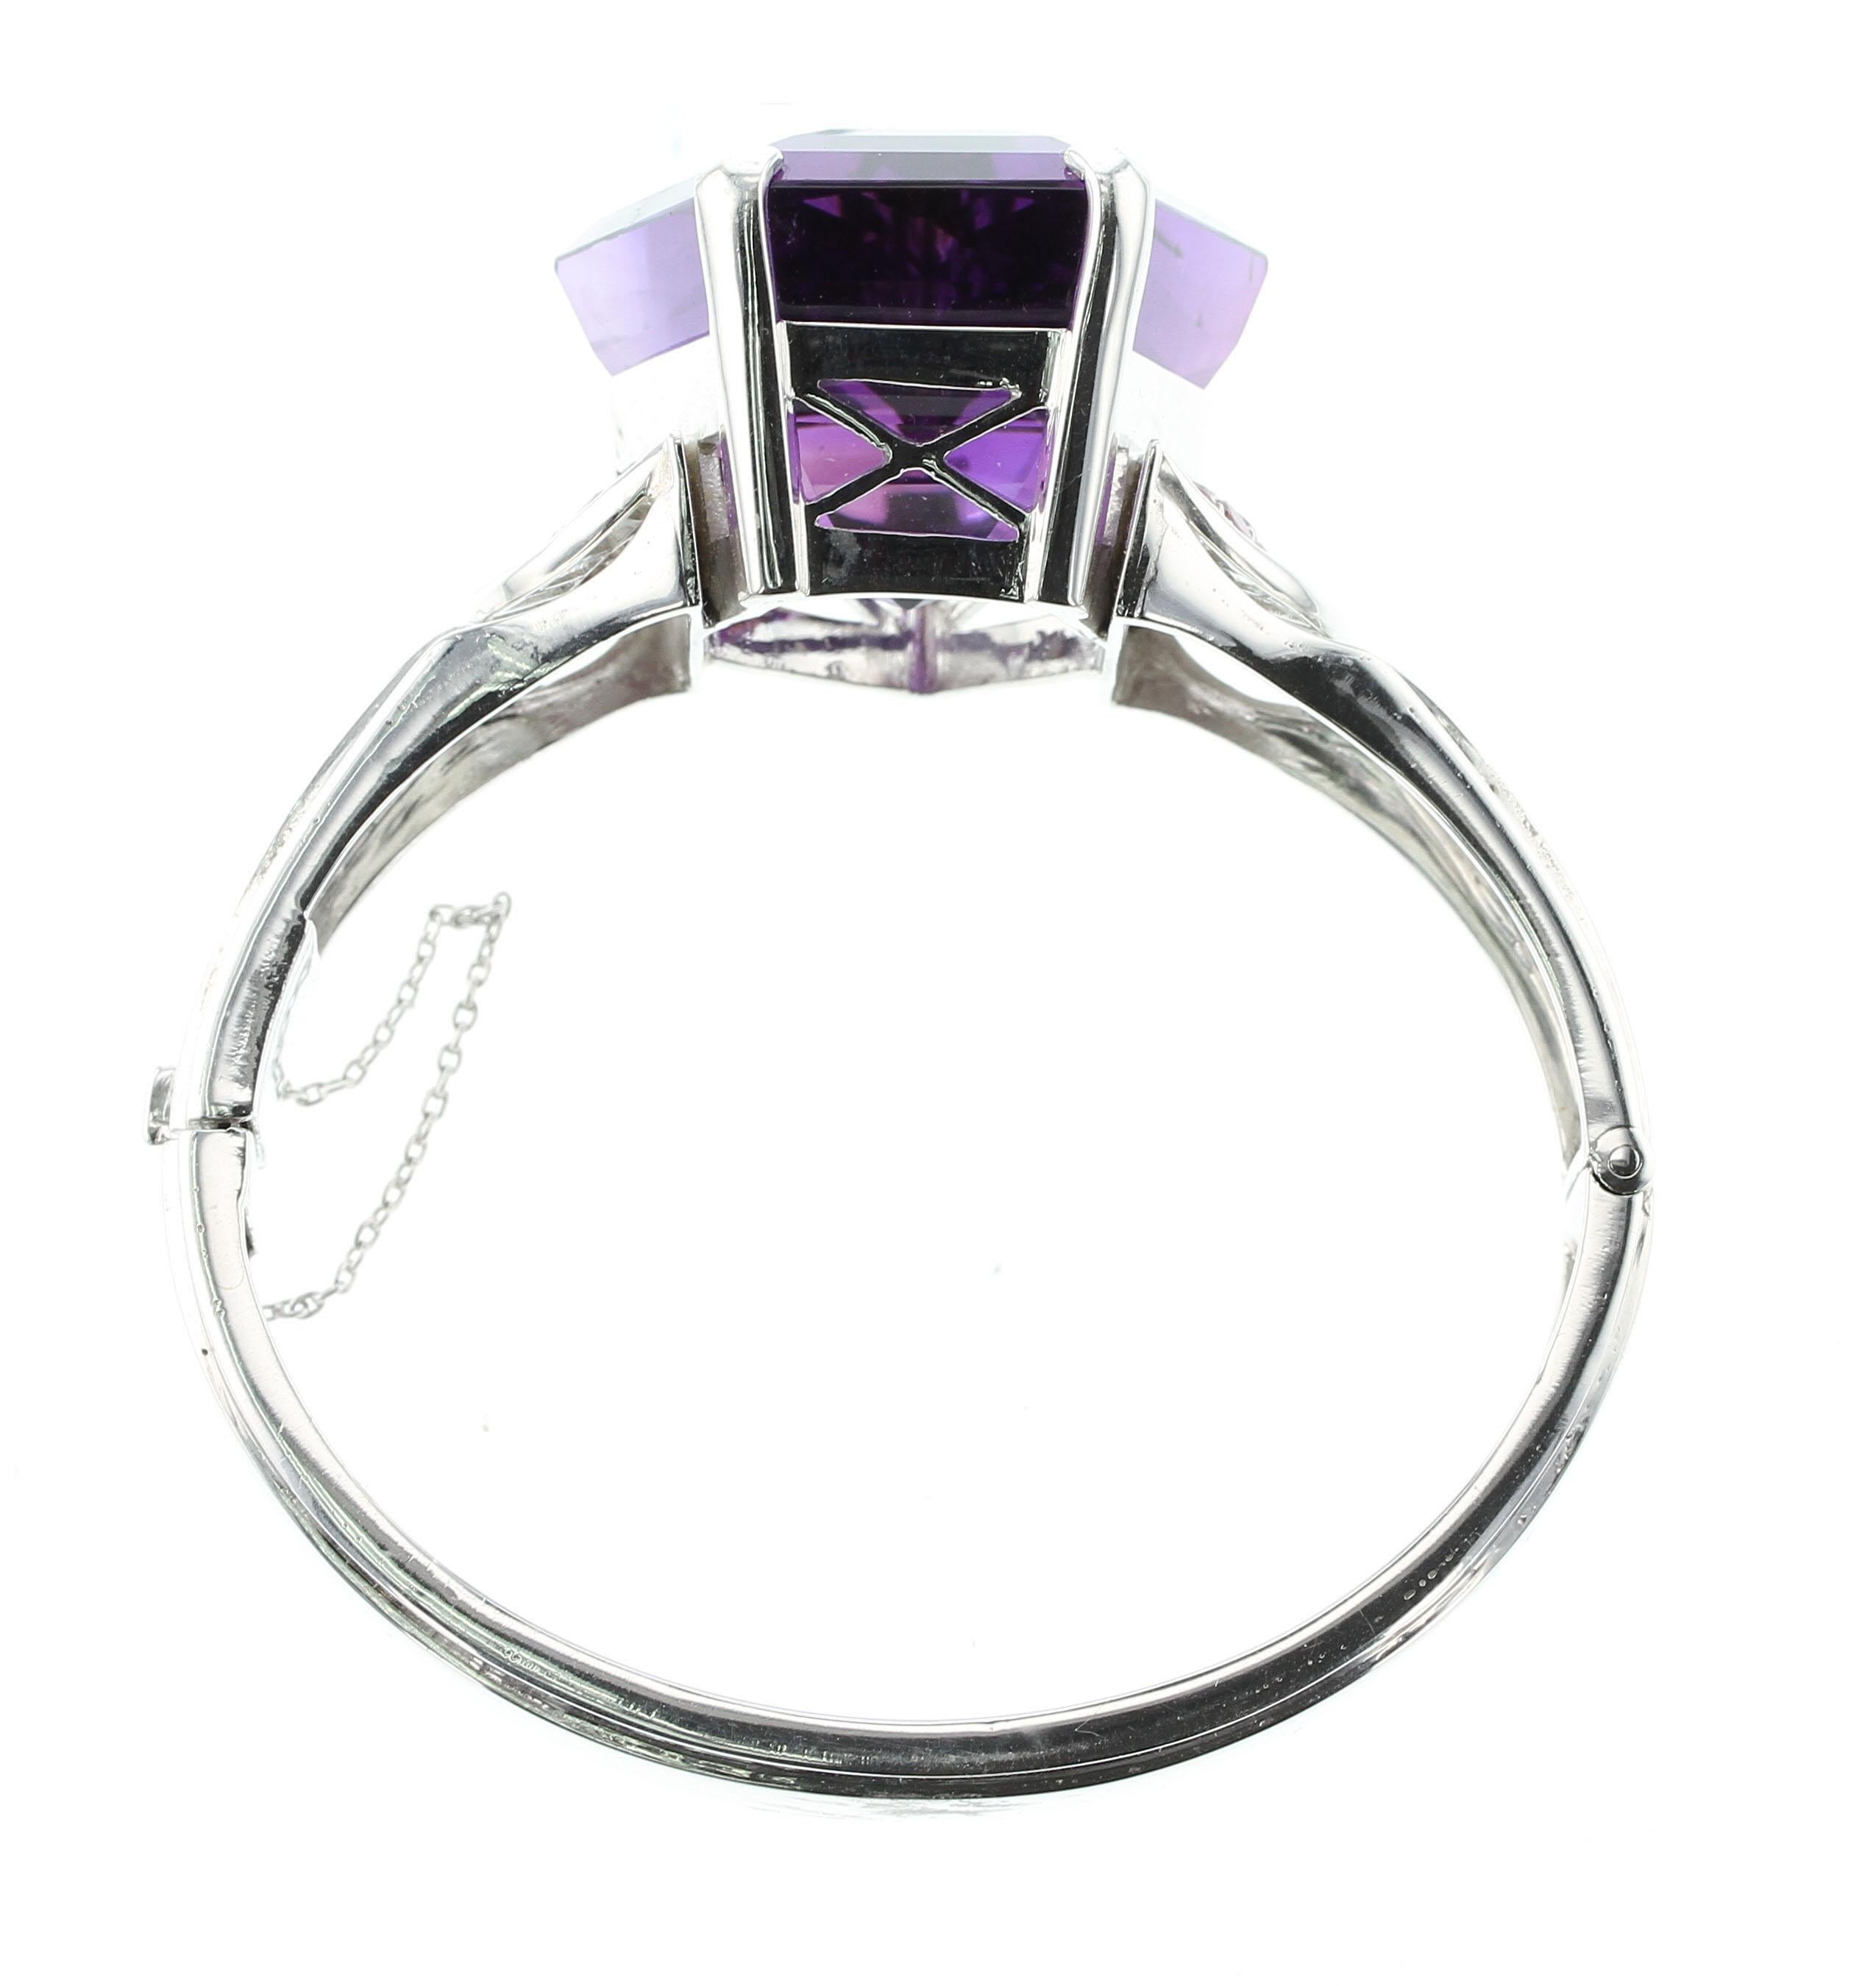 Pentagonal Amethyst with Rubies and Diamonds, Cuff Bracelet, Palladium In Good Condition For Sale In New York, NY